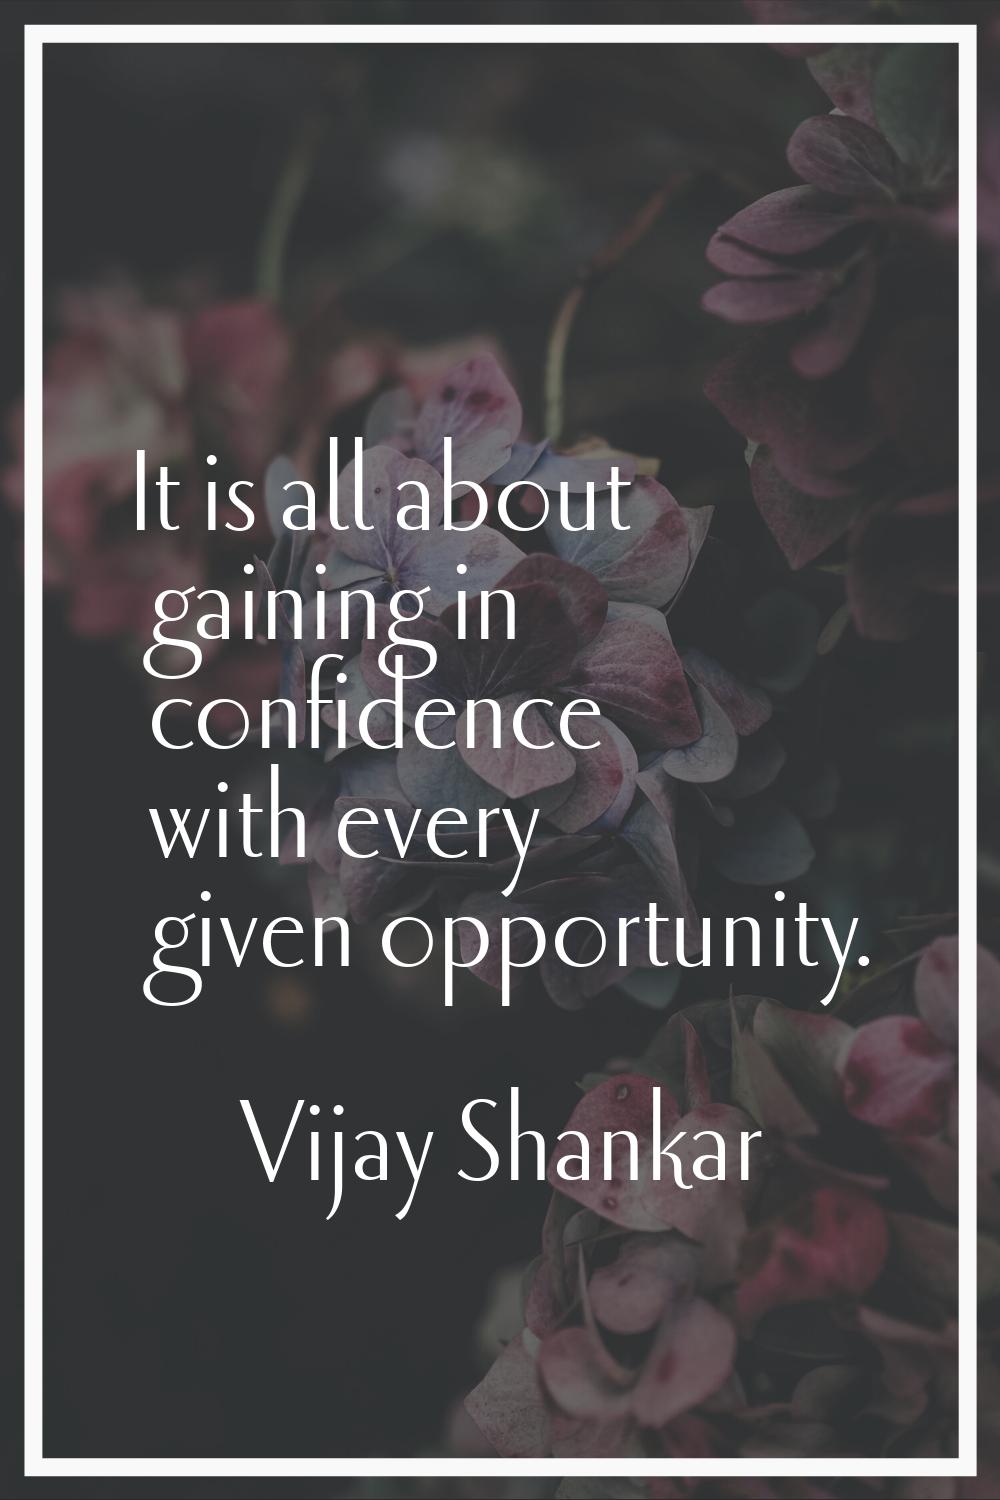 It is all about gaining in confidence with every given opportunity.